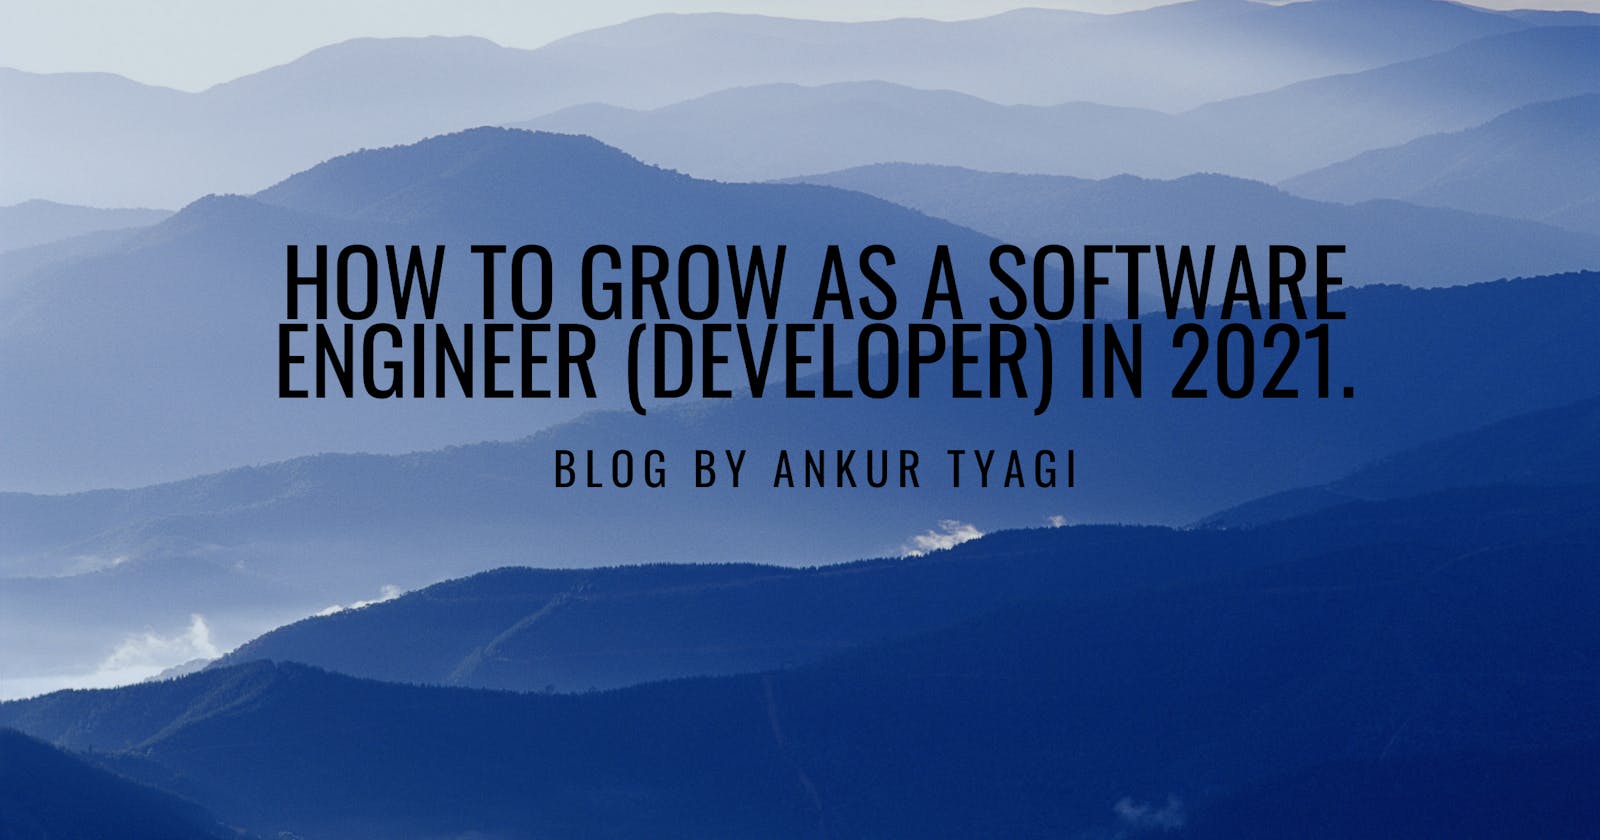 How To Grow As A Software Engineer (Developer) In 2021